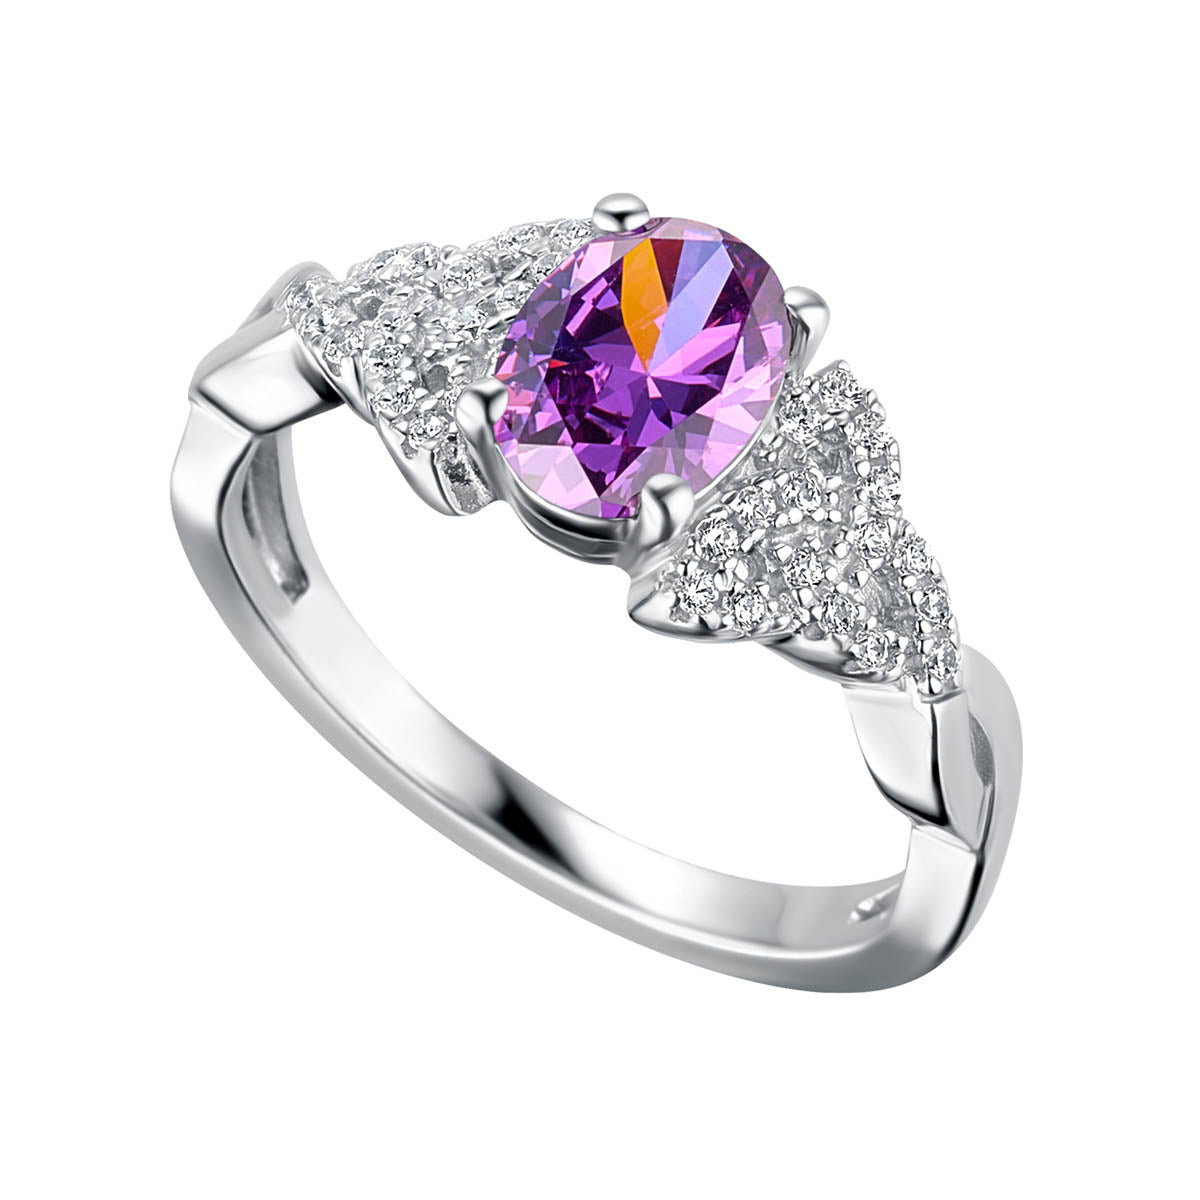 Stock image of Solvar Sterling Silver February Birthstone Trinity Knot Ring S2113502